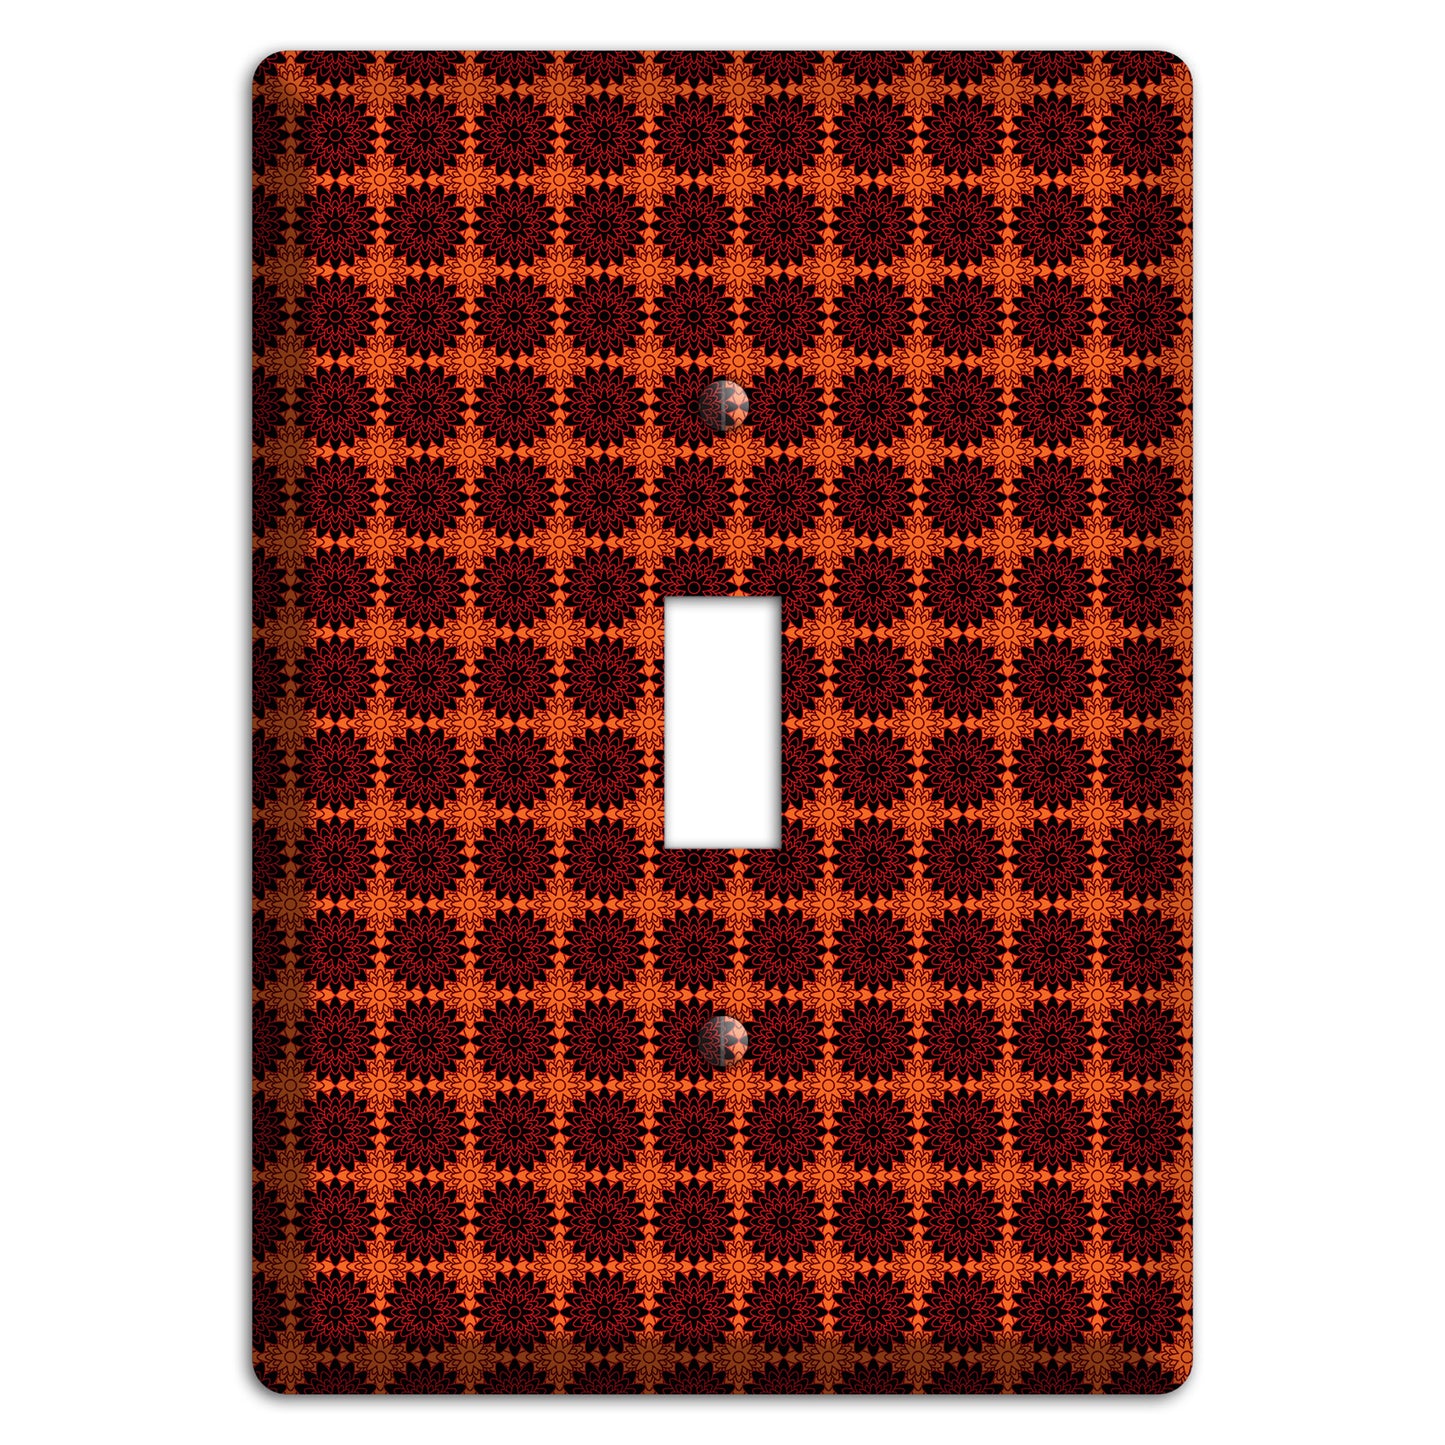 Red with Tiled Maroon Foulard Cover Plates